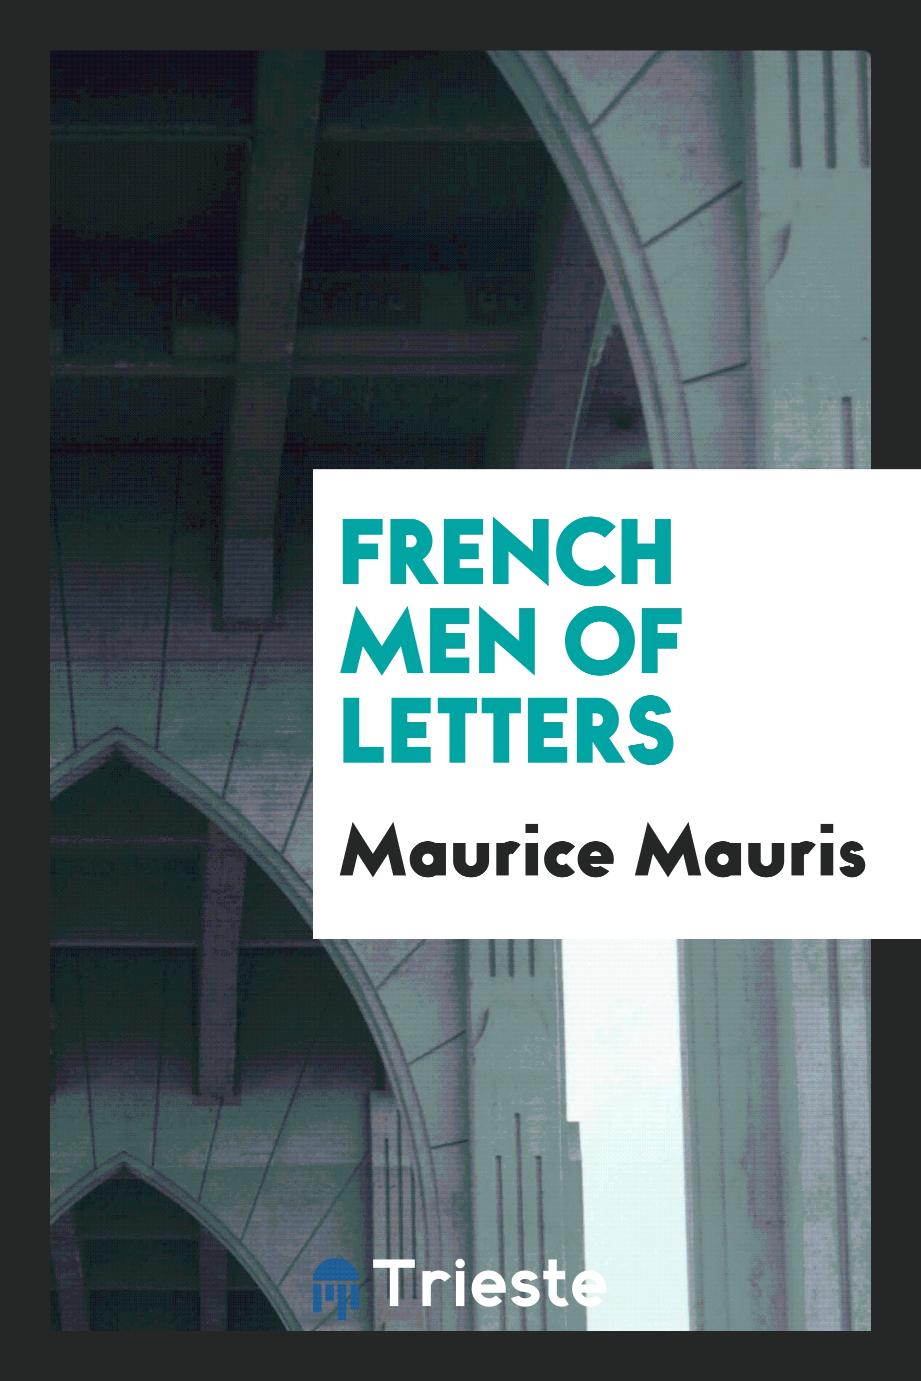 French men of letters